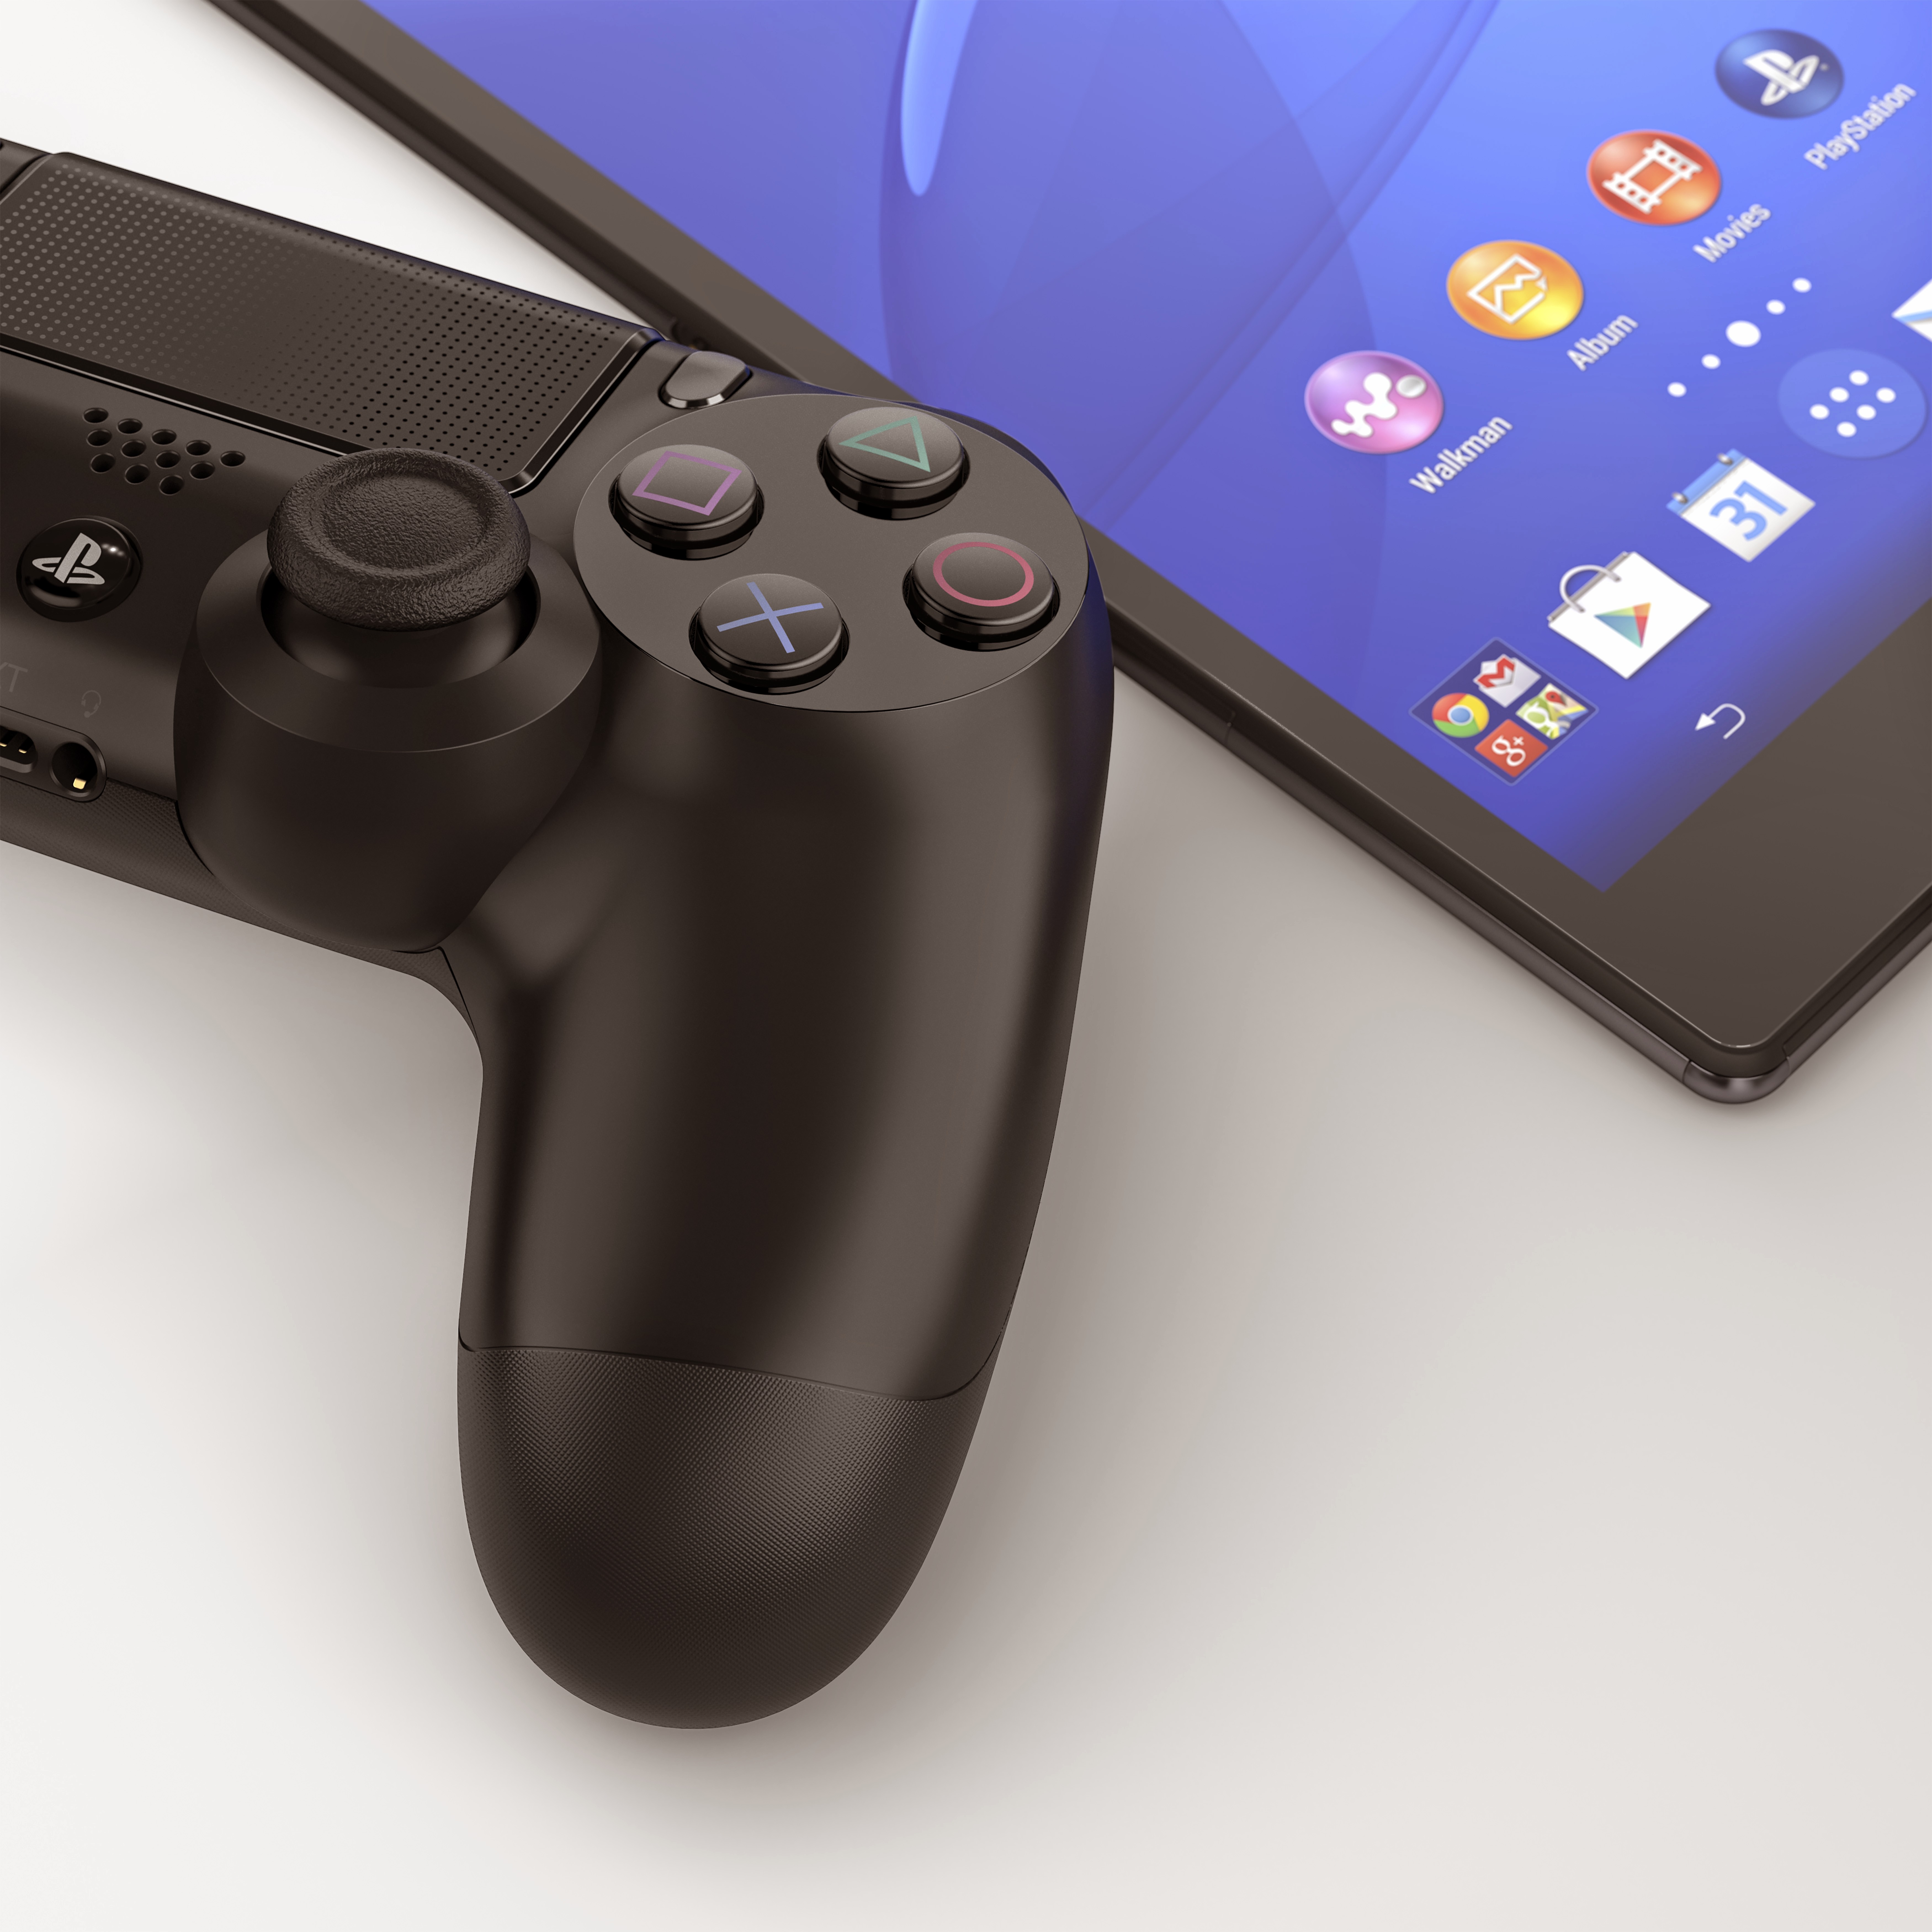 12_Xperia_Z3_Tablet_Compact_PS4_Remote